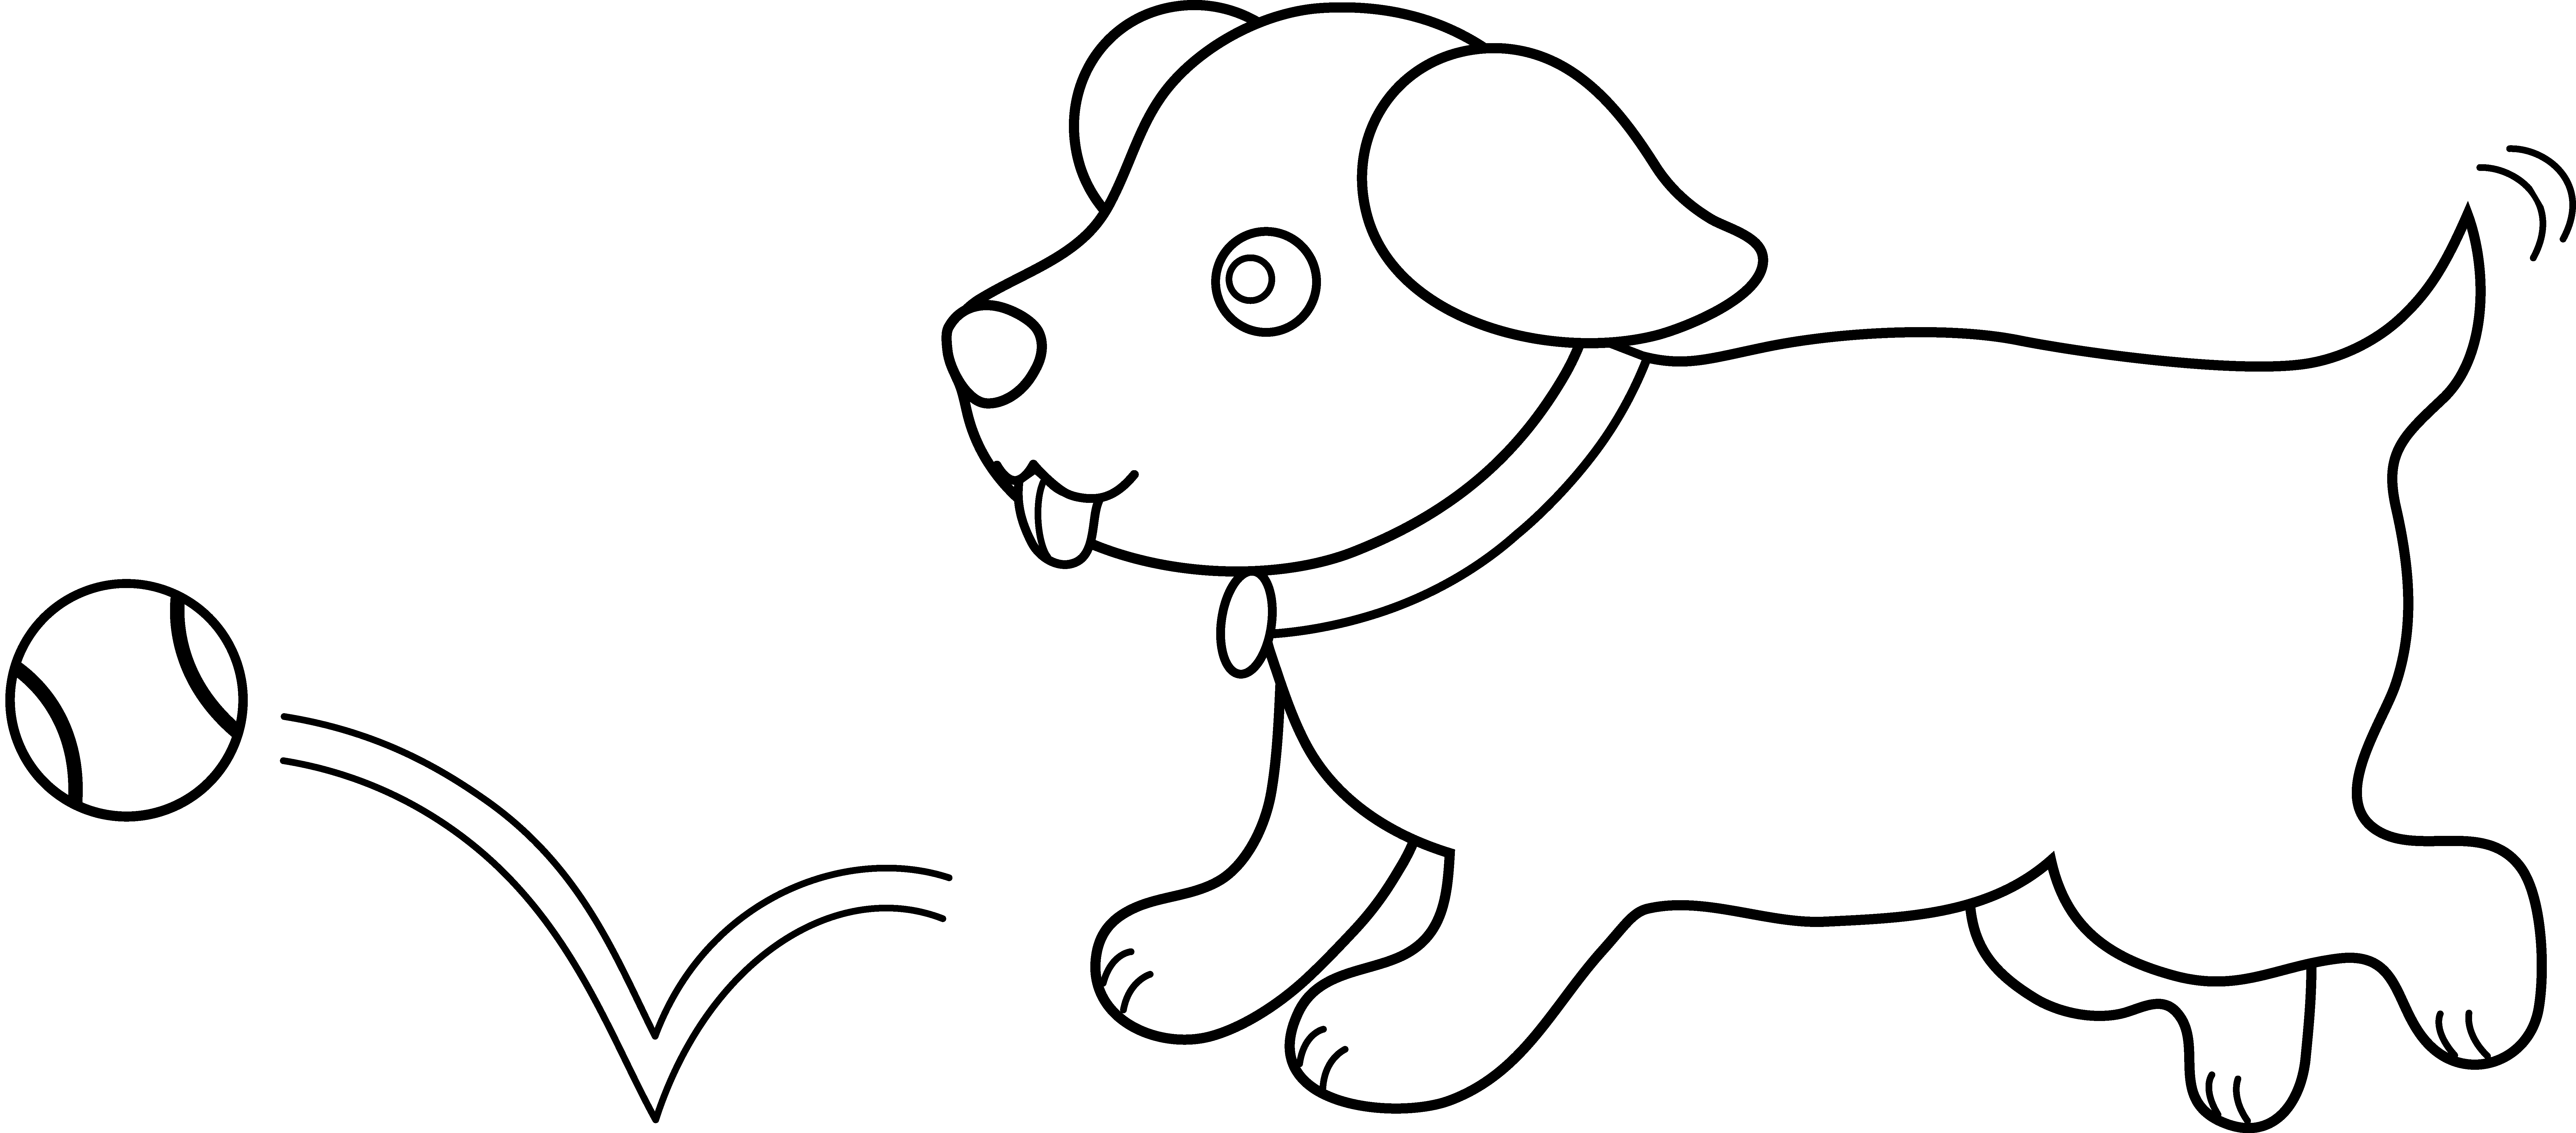 Cute Dog Clip Art Black And White - Cute Puppies Black And White, Transparent background PNG HD thumbnail